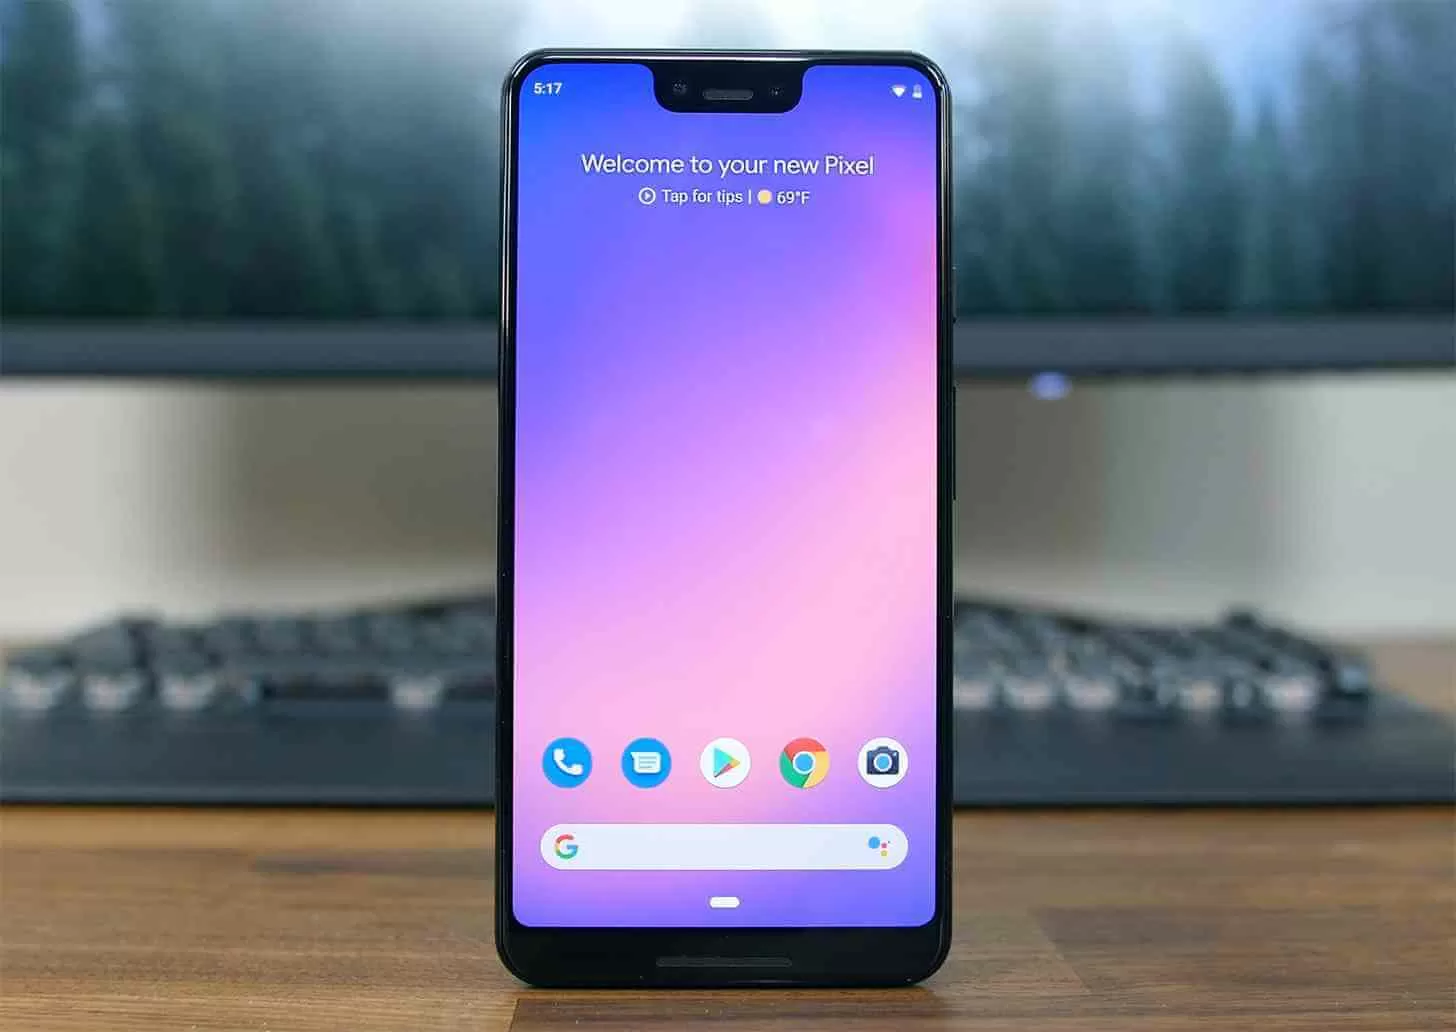 Google's deplorable handling of the Pixel 3 screen flash issue may be coming to an end